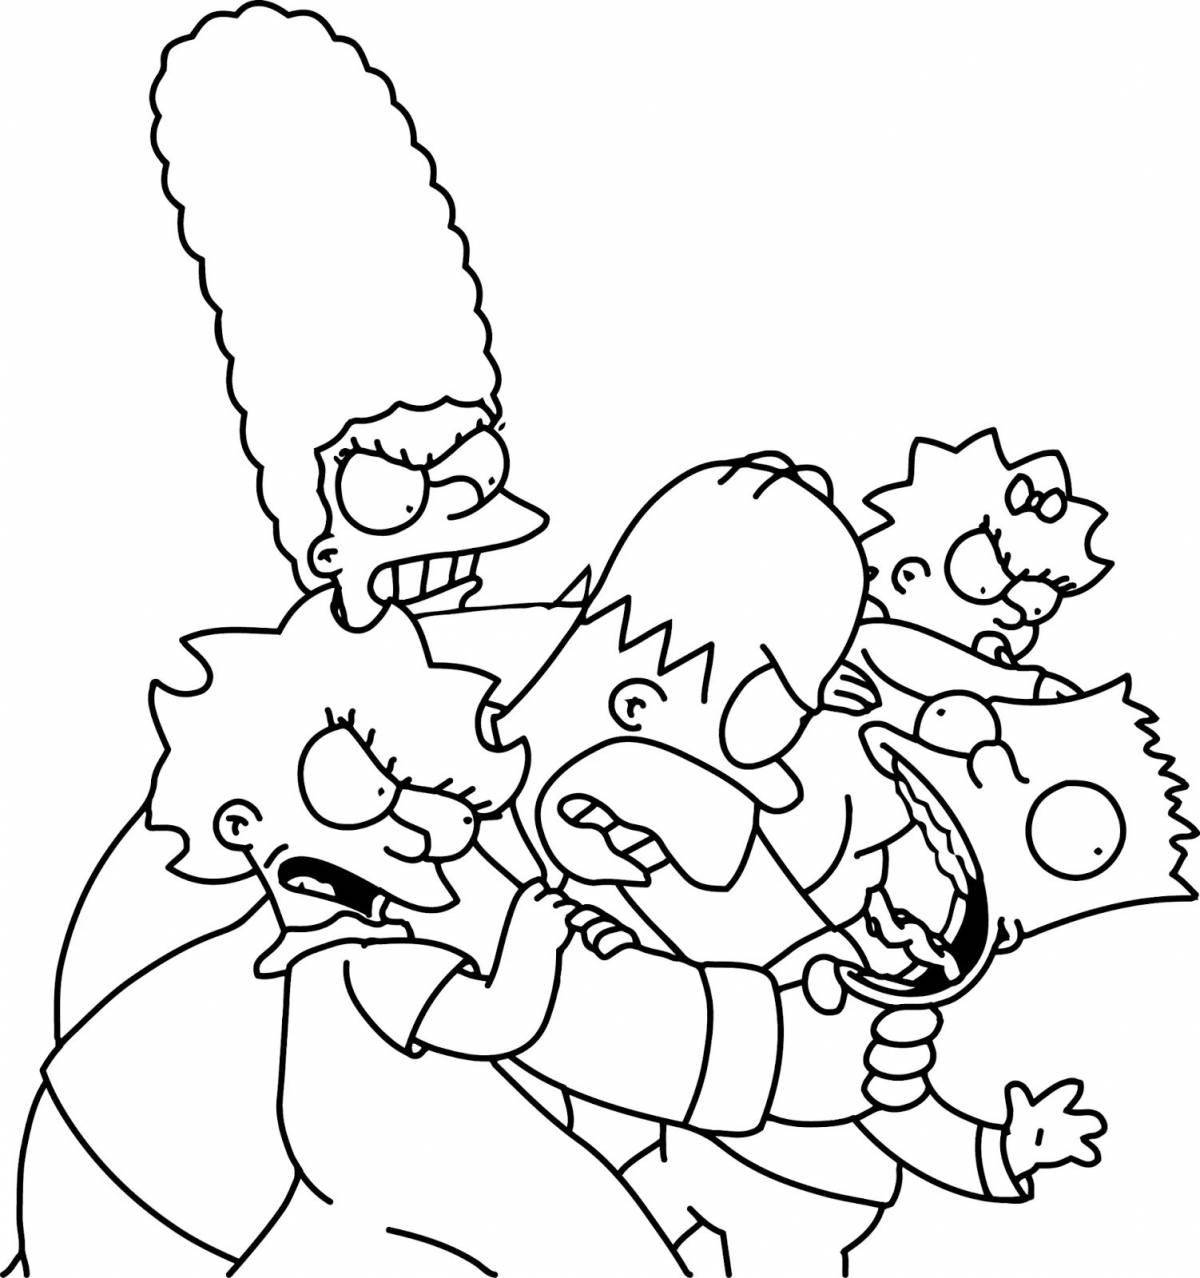 Color frenzy lisa simpson coloring page